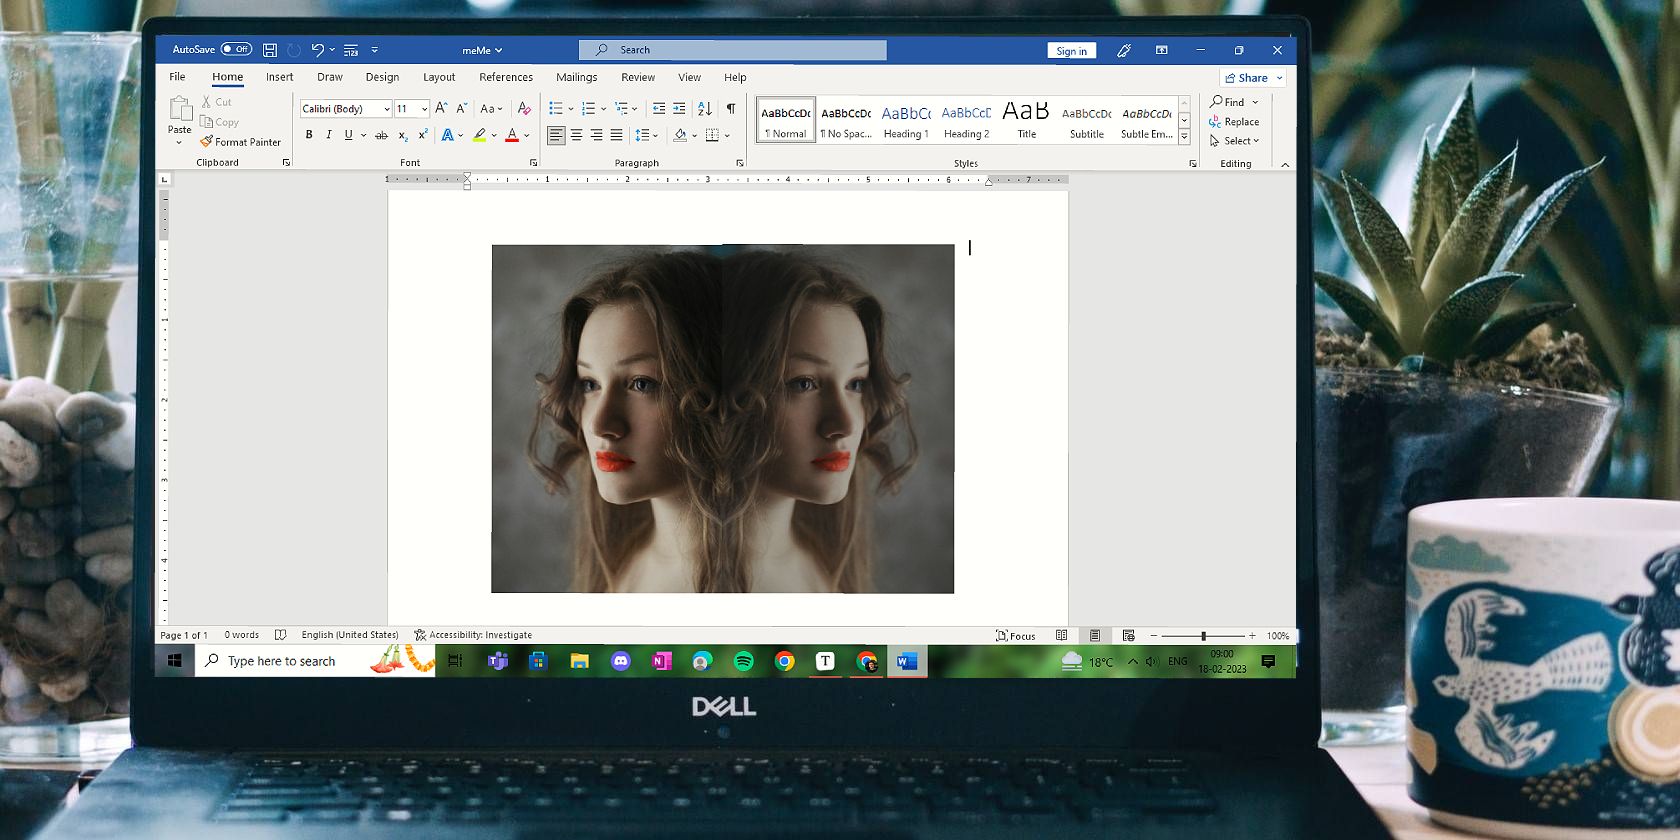 Image Mirrored in Word on a Laptop Screen